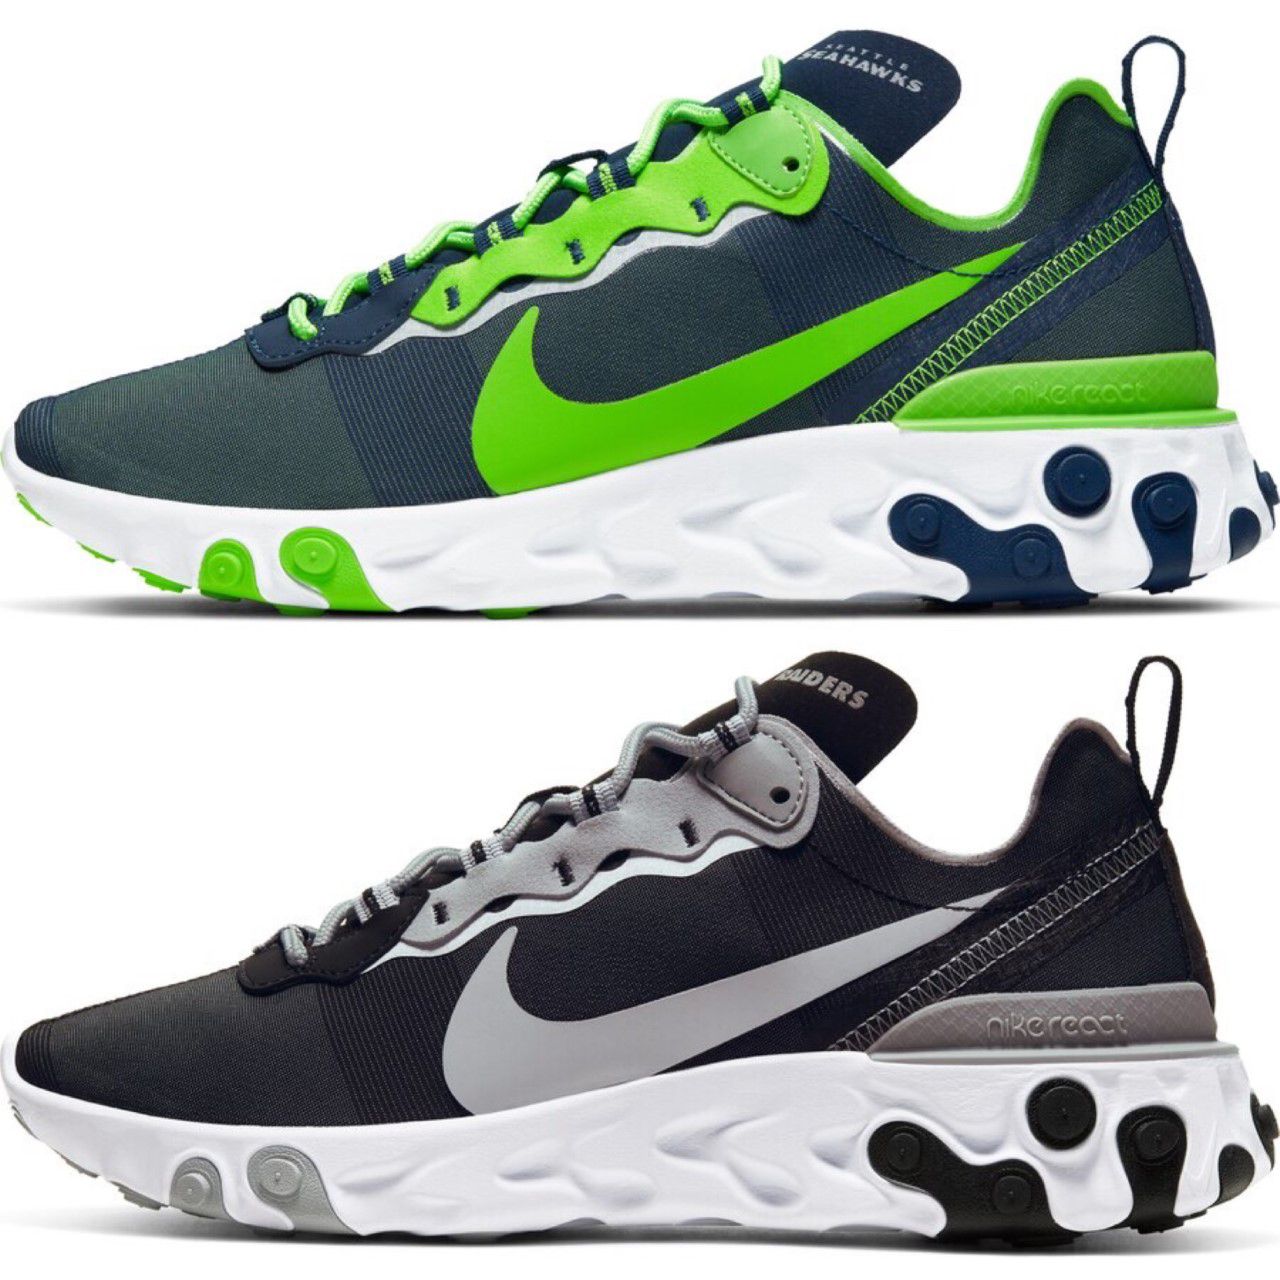 petal session Mediate Seattle Seahawks or Oakland Raiders React Element 55 shoes: Which team got  the better limited edition Nike sneakers? - oregonlive.com